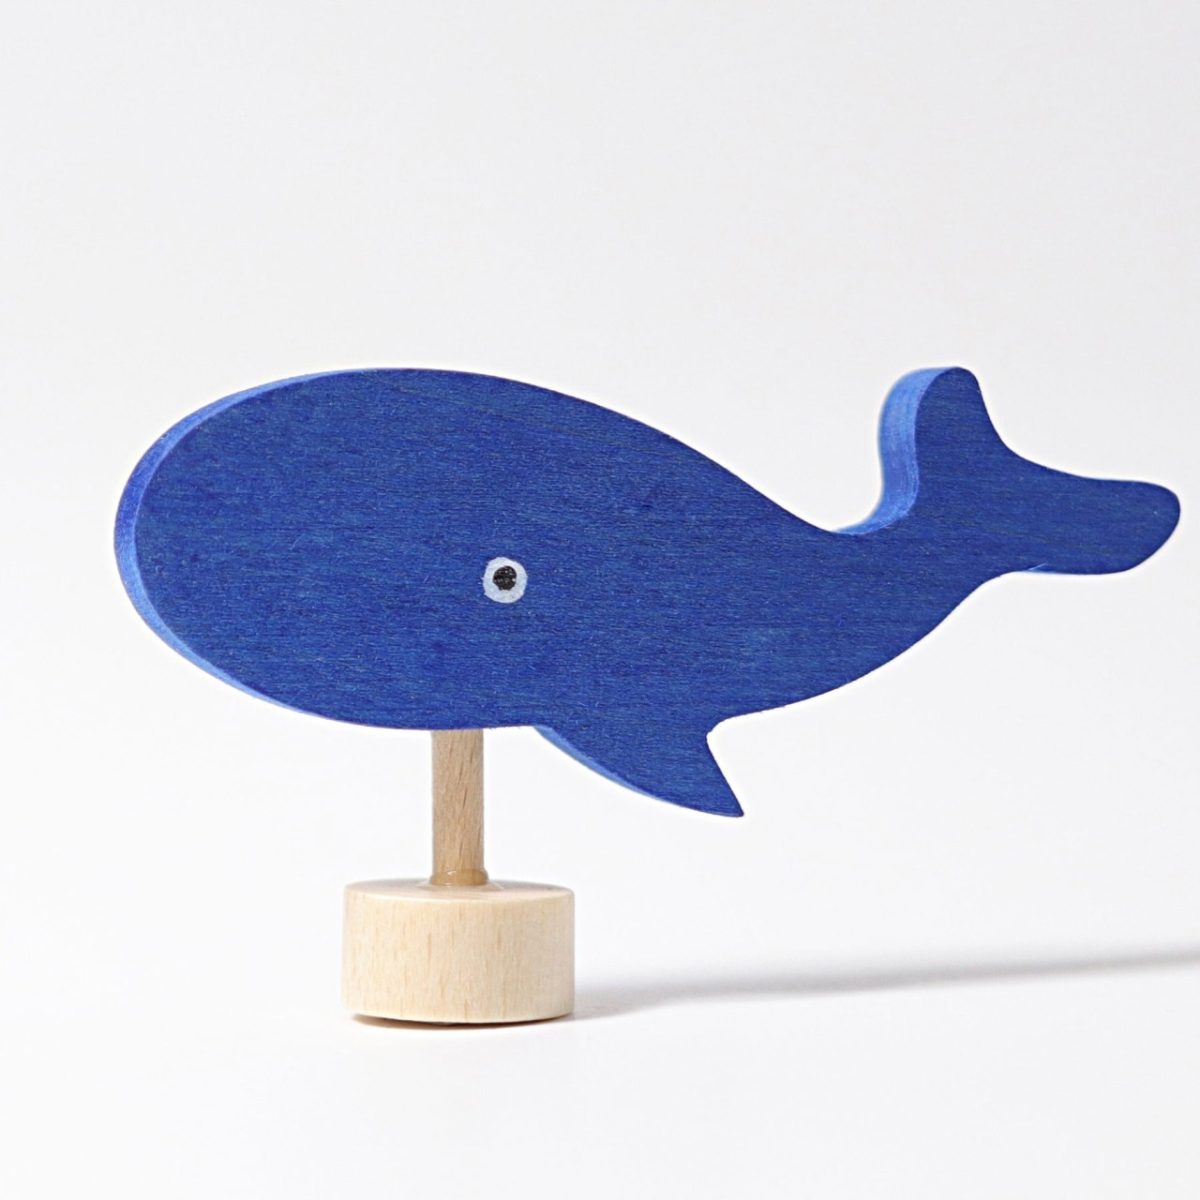 Grimm's Celebration Ring Figure - Whale | | Grimm's Spiel and Holz | Little Acorn to Mighty Oaks